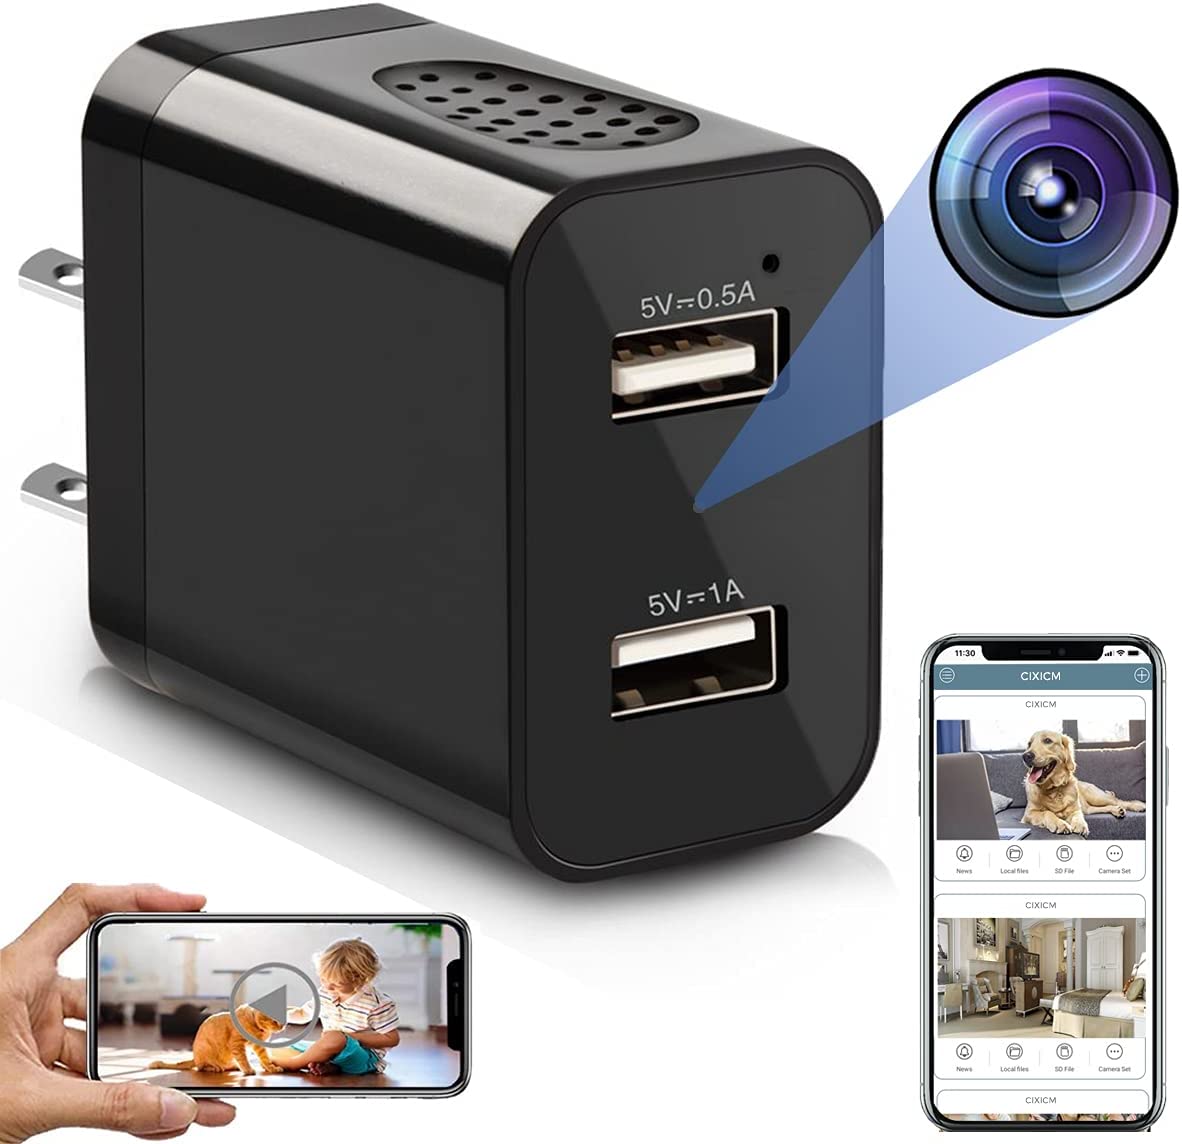 Wireless camera with wifi charger